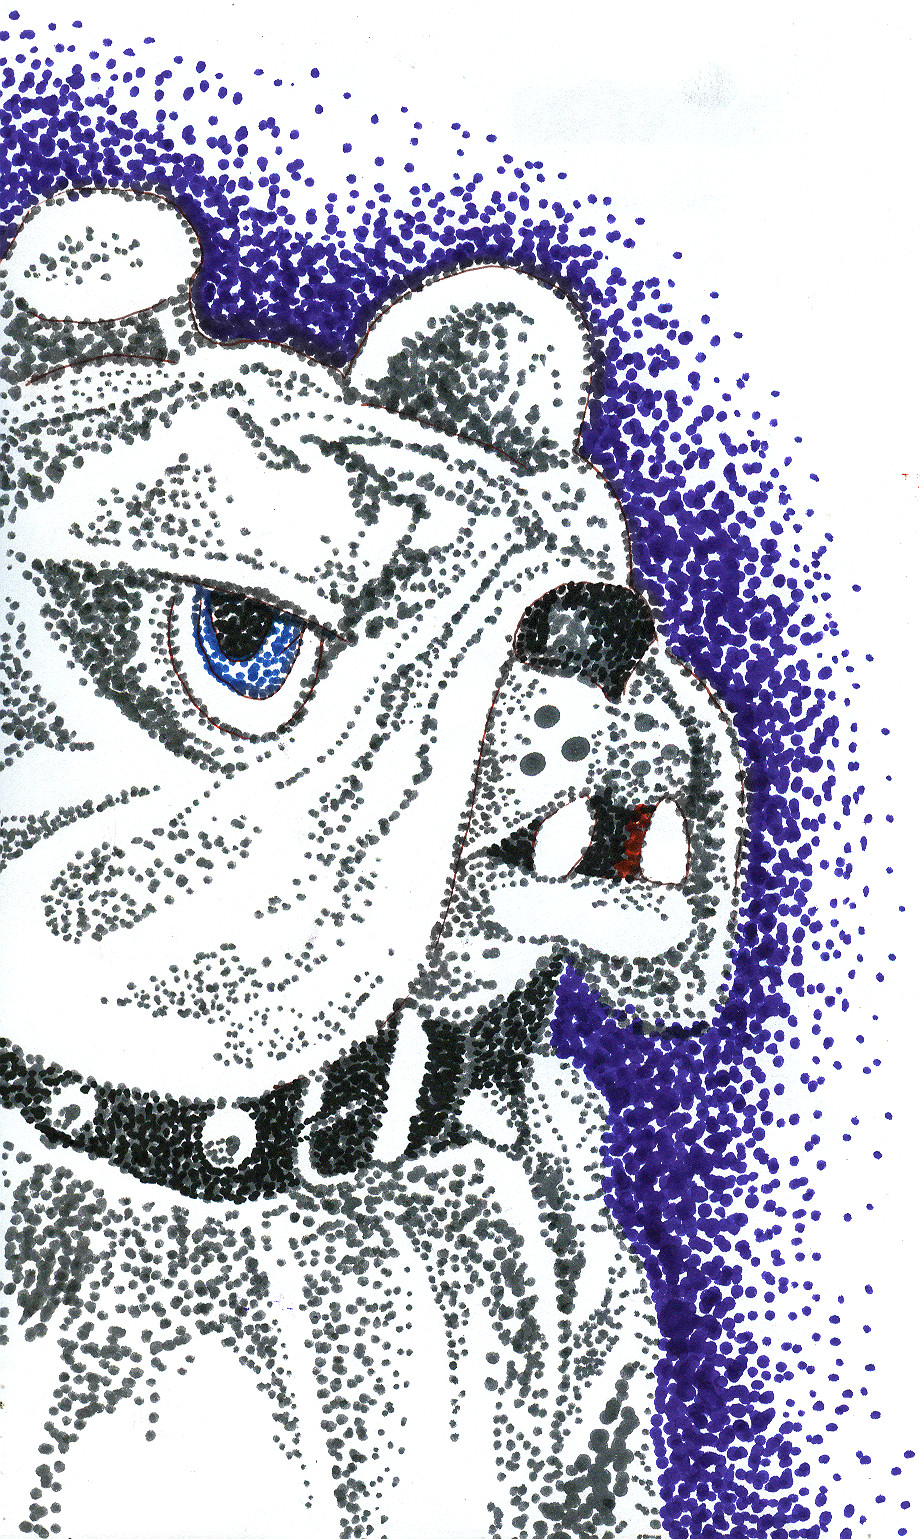 Drawing N Painting Classes Here S My Pointillist Cujo Got A Picture You D Like to Draw Paint